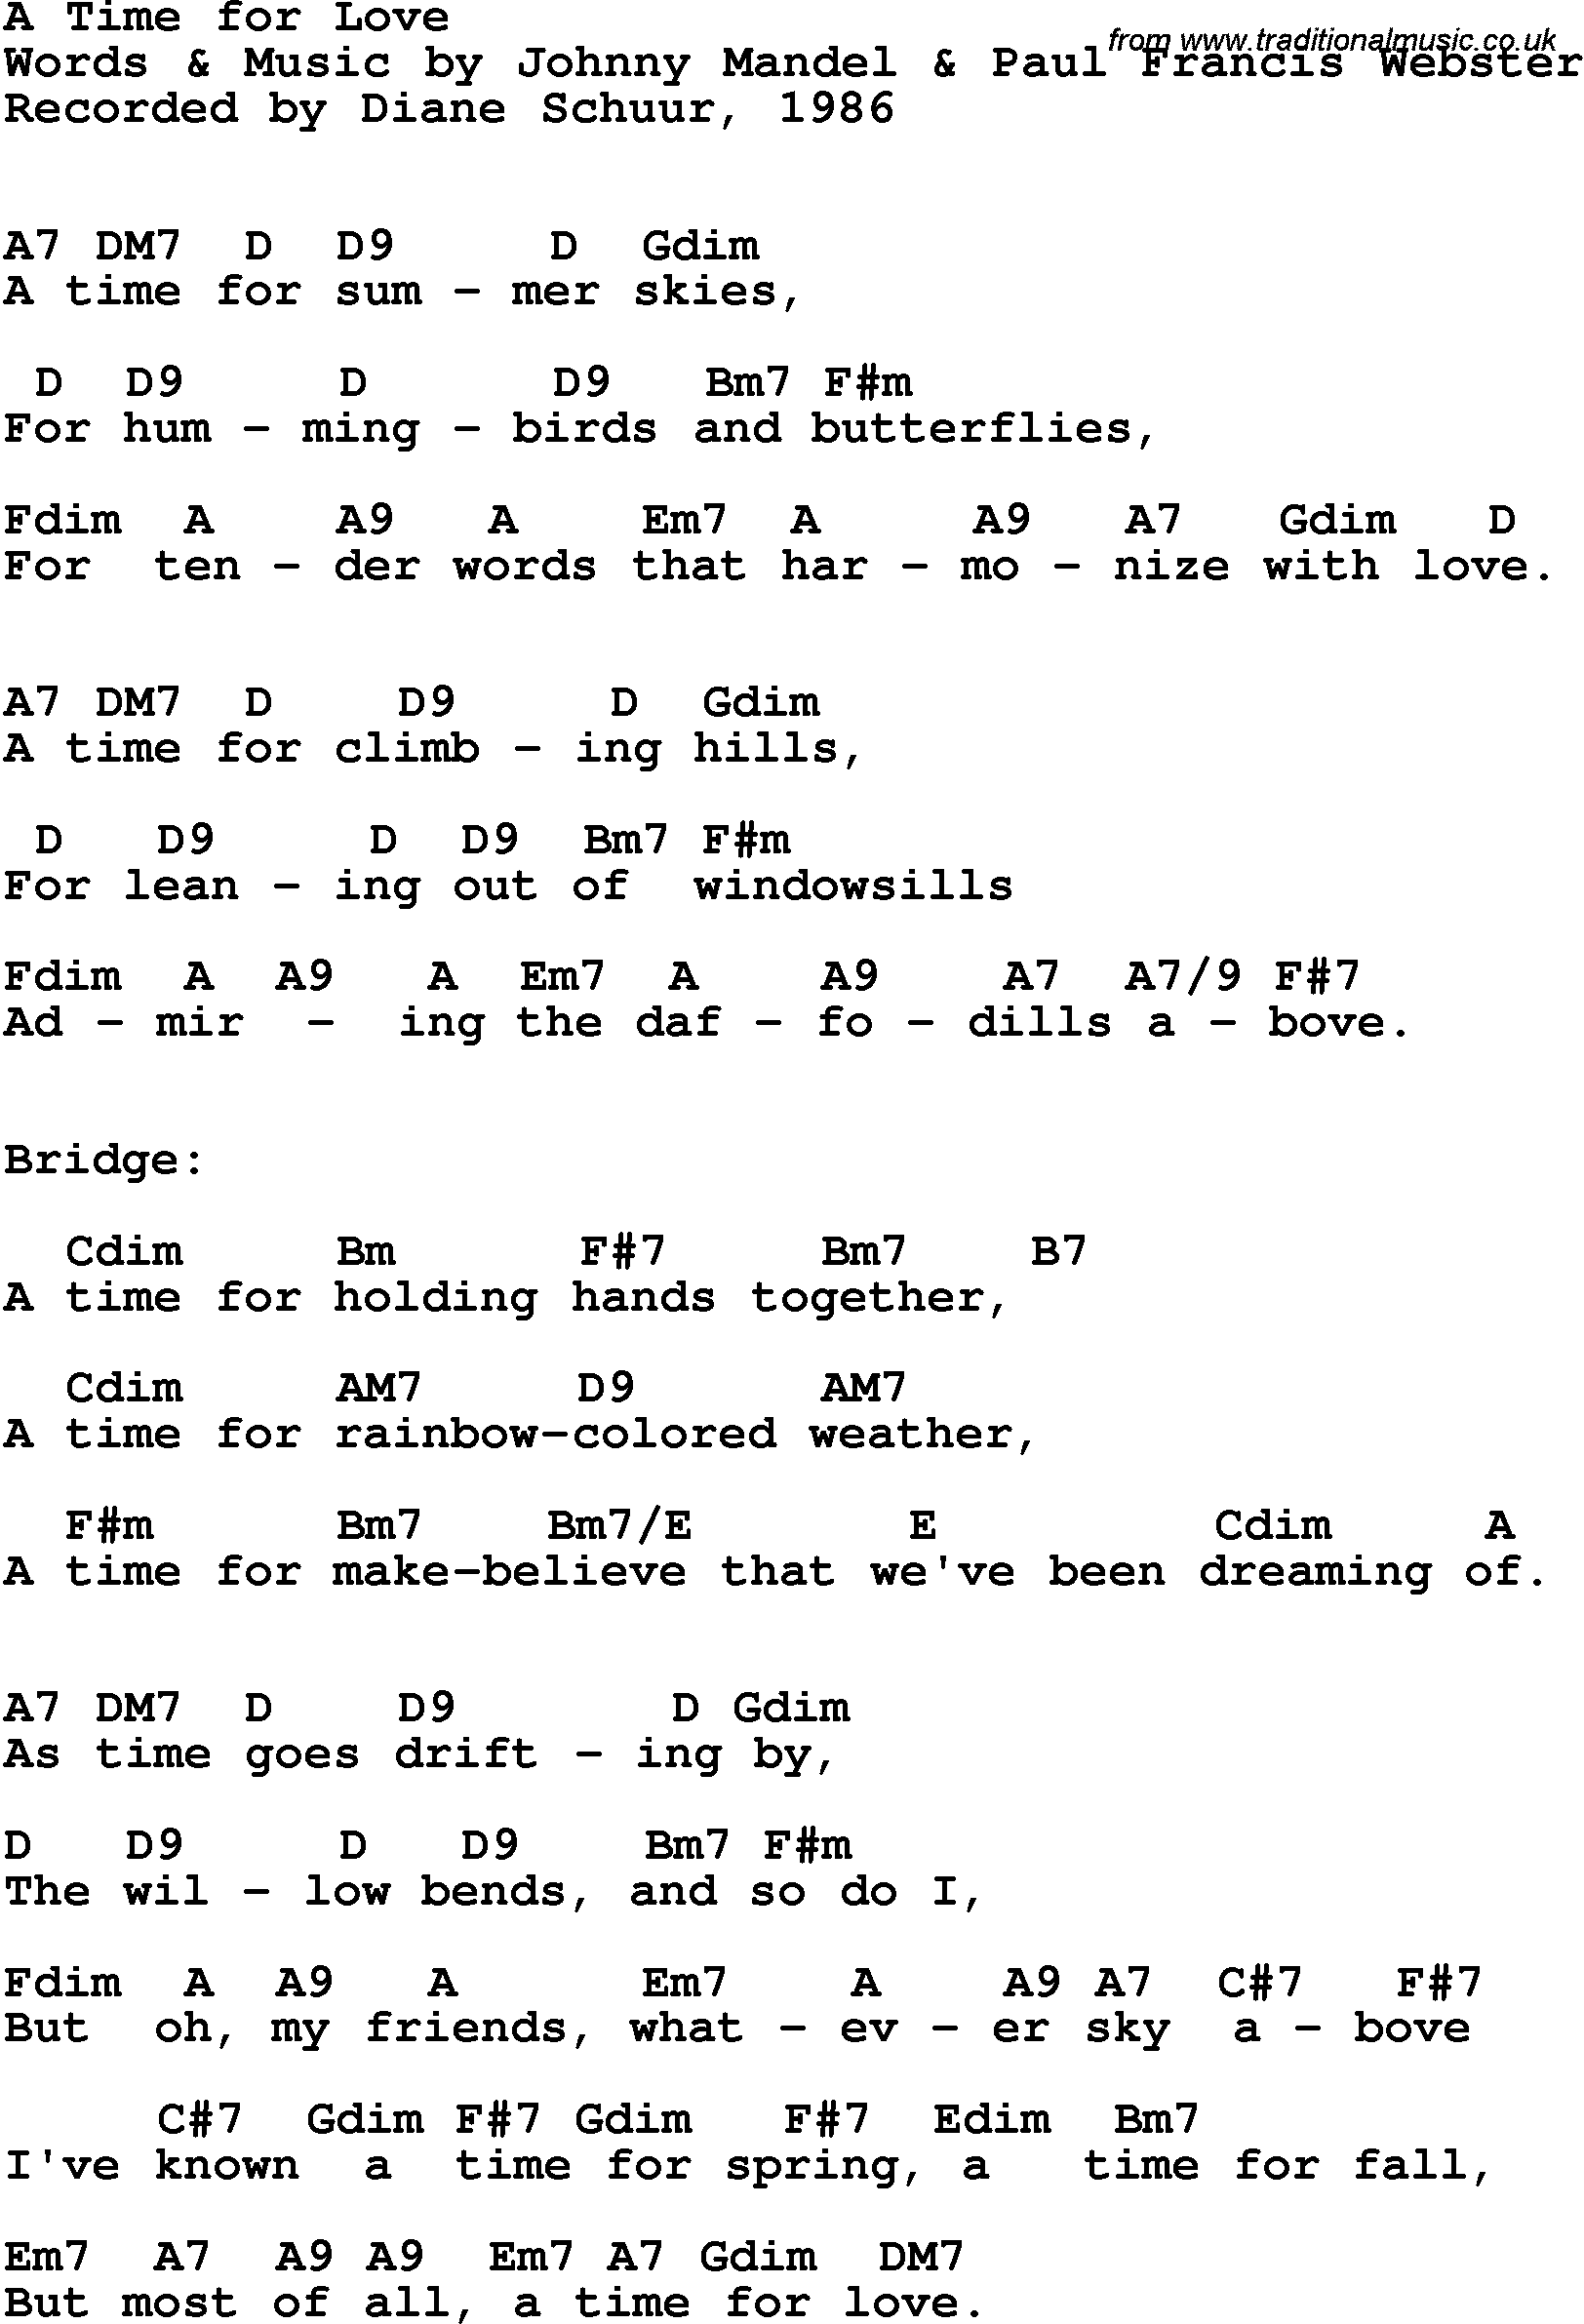 Song Lyrics with guitar chords for Time For Love, A - Diane Schuur, 1986